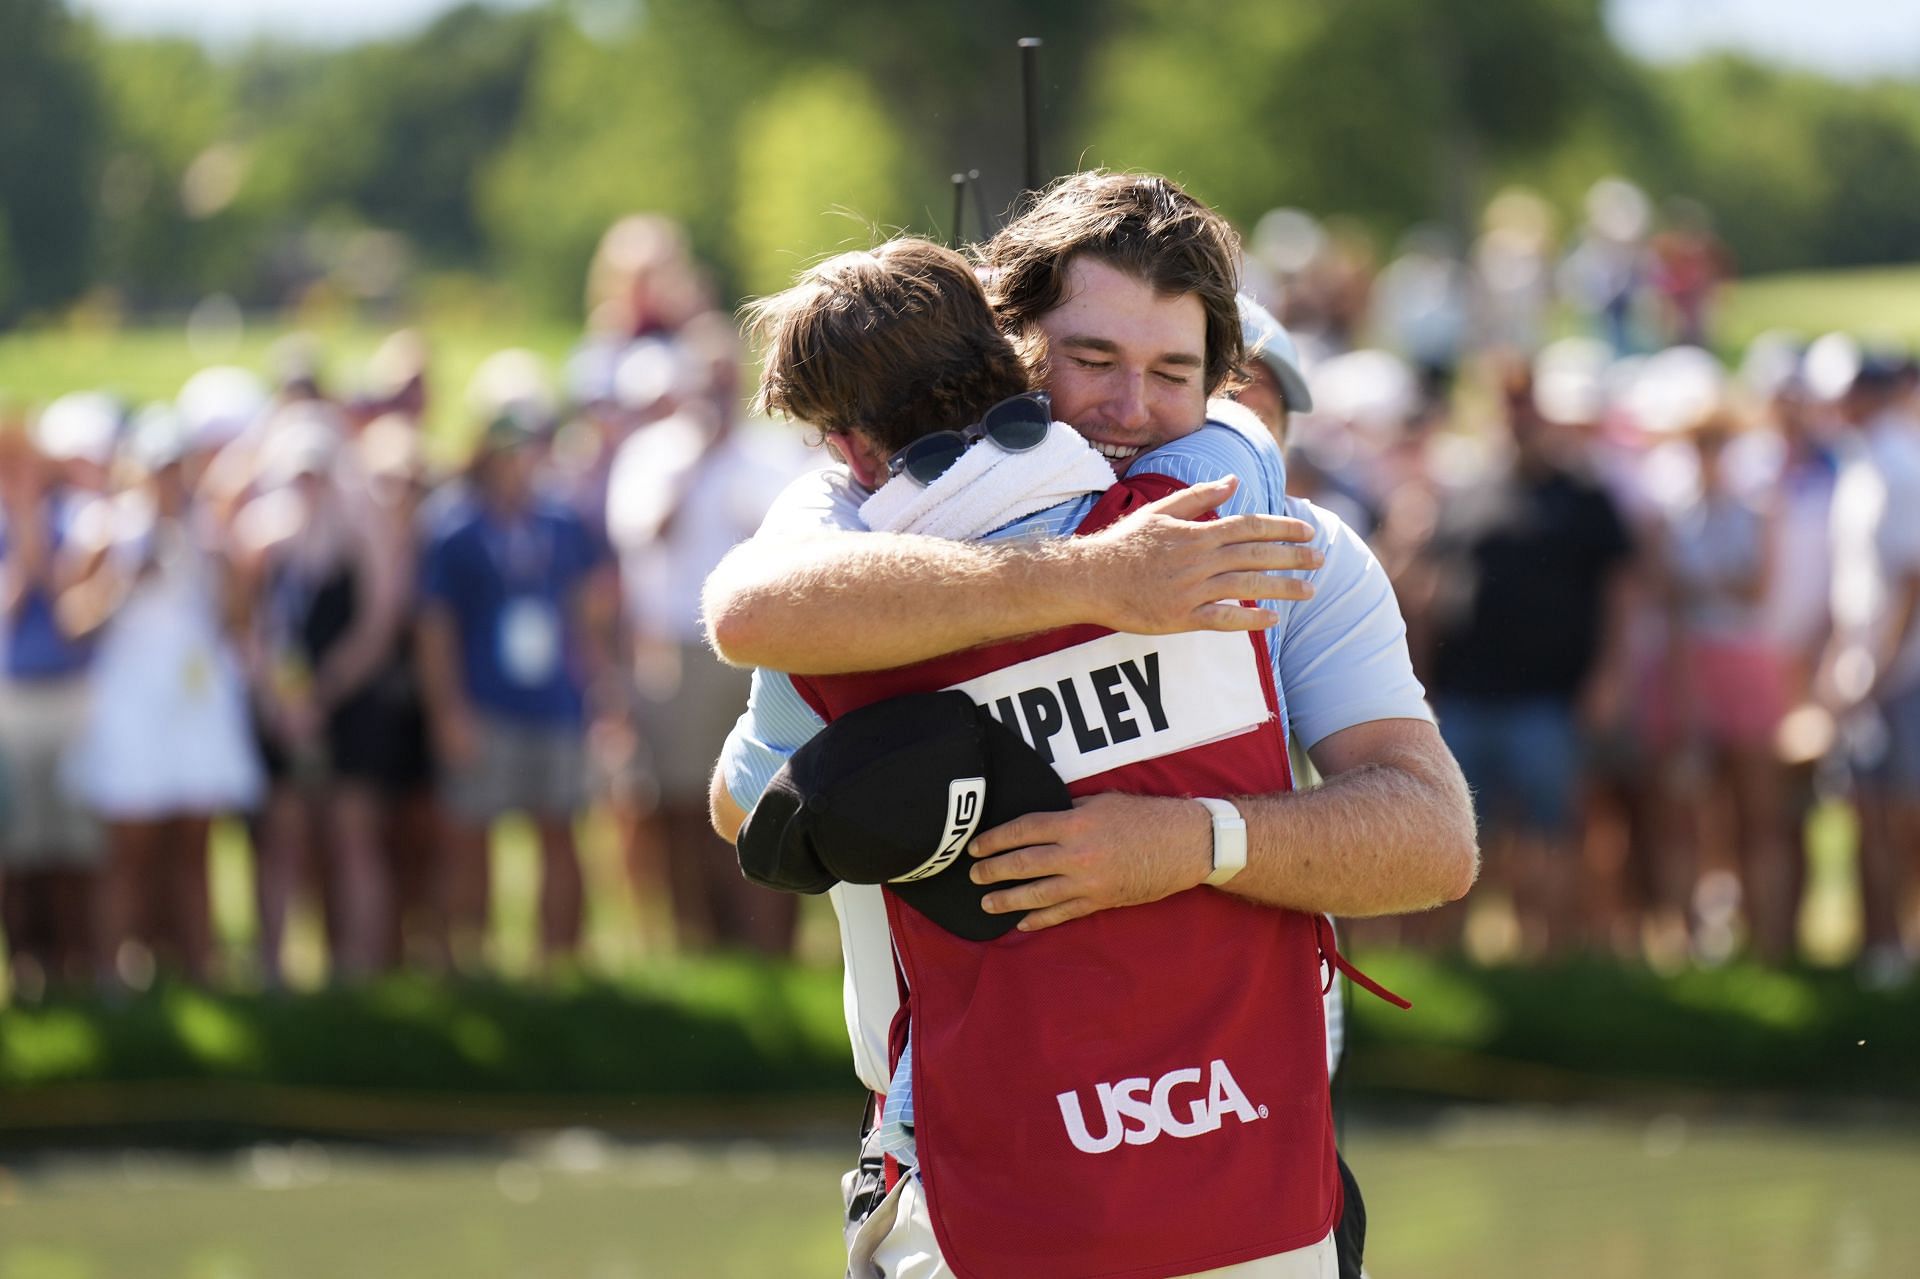 Neal with his fellow, Carter Pitcairn at the 123rd U.S. Amateur Championship Semifinal